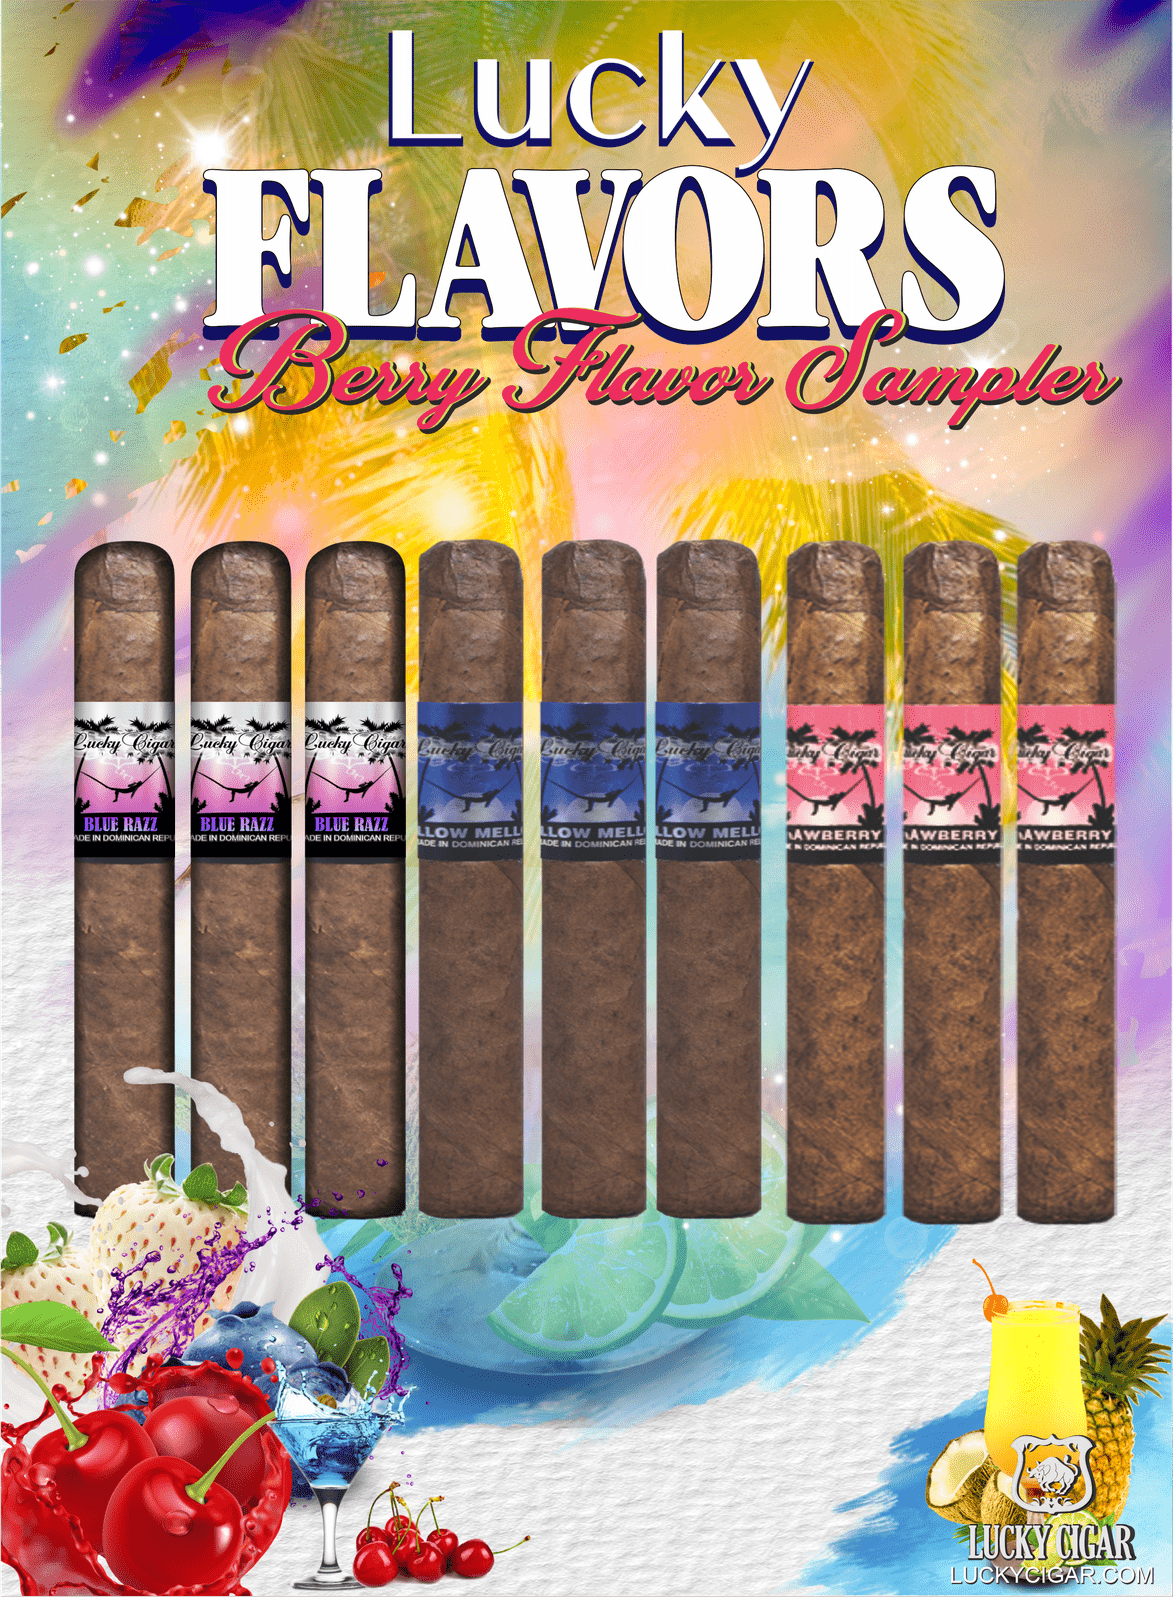 Flavored Cigars: Lucky Flavors 9 Piece Berry Fruit Sampler - Mellow Mellow, Blue Razz, Strawberry 3 Mellow Mellow 5x42 Cigars 3 Blue Razz 5x42 Cigars 3 Strawberry 5x42 Cigars